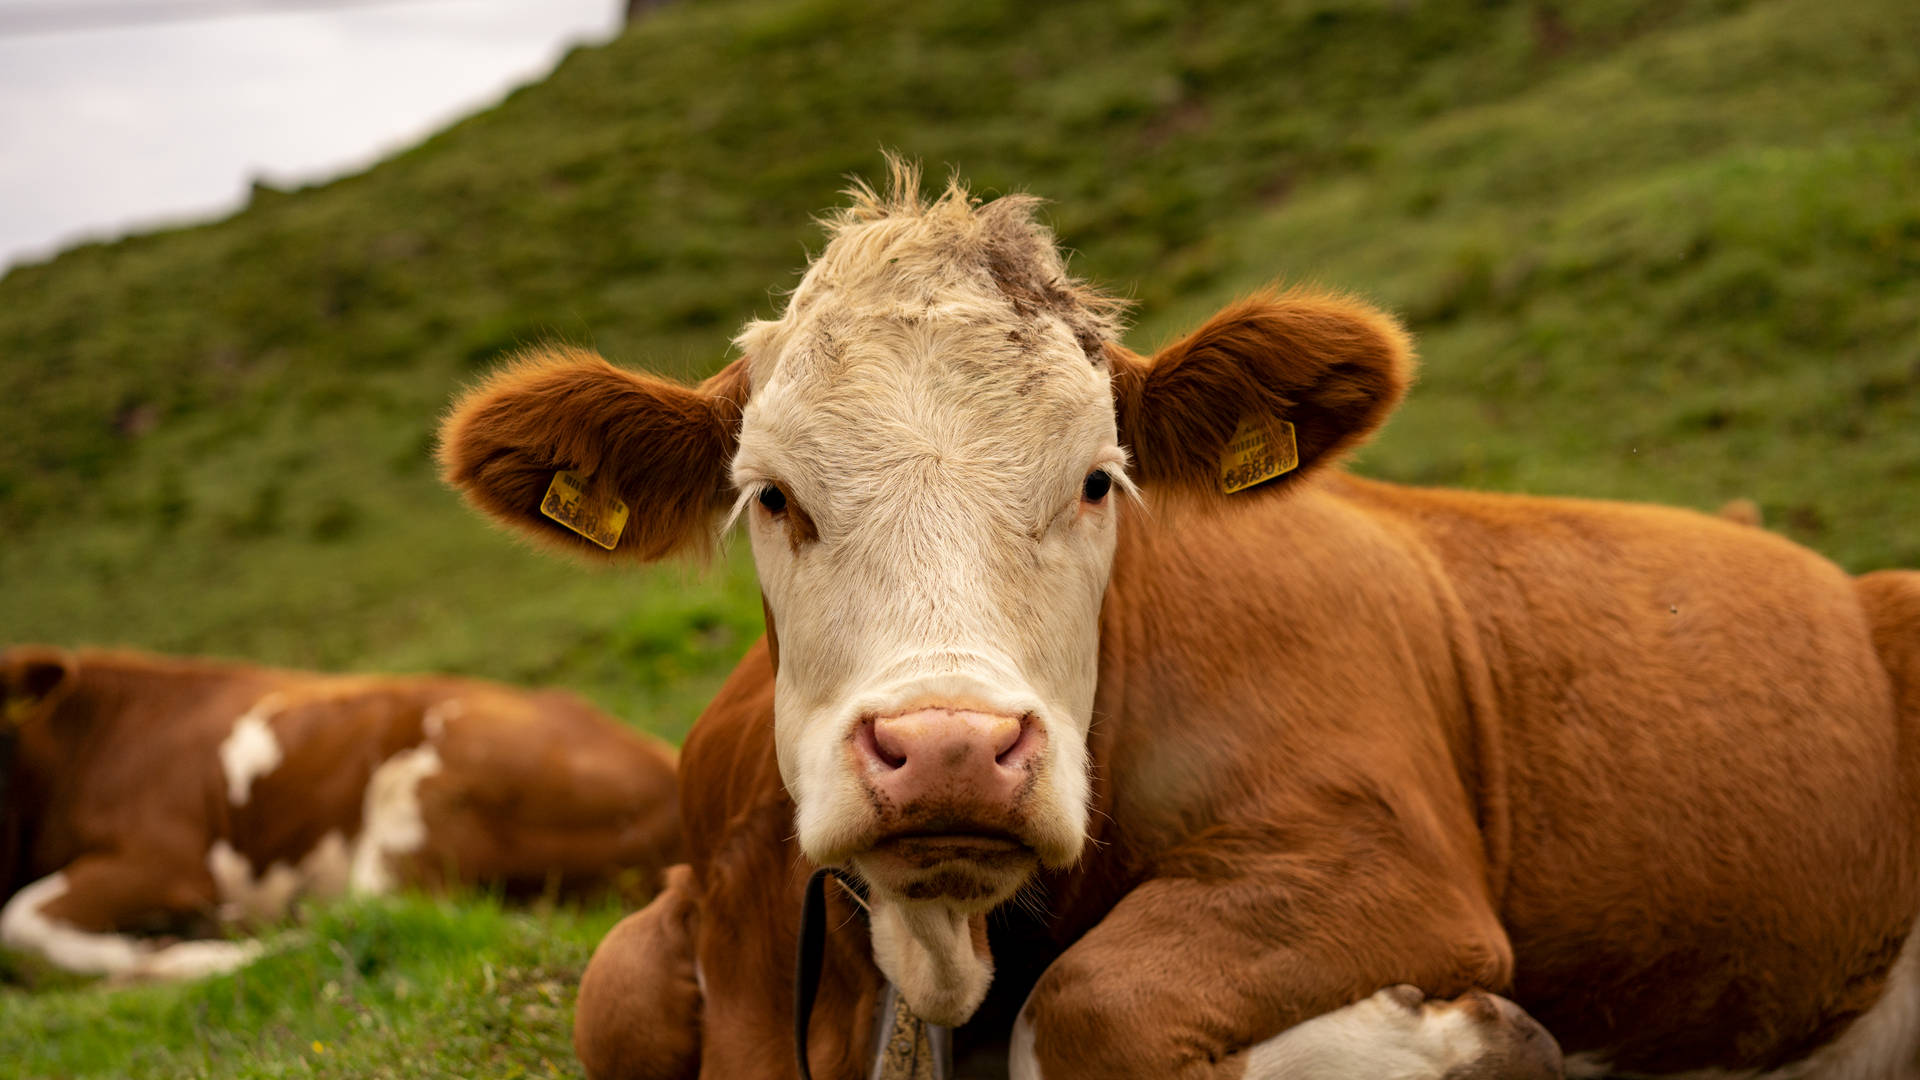 Cute Cow With White Face And Brown Body Background